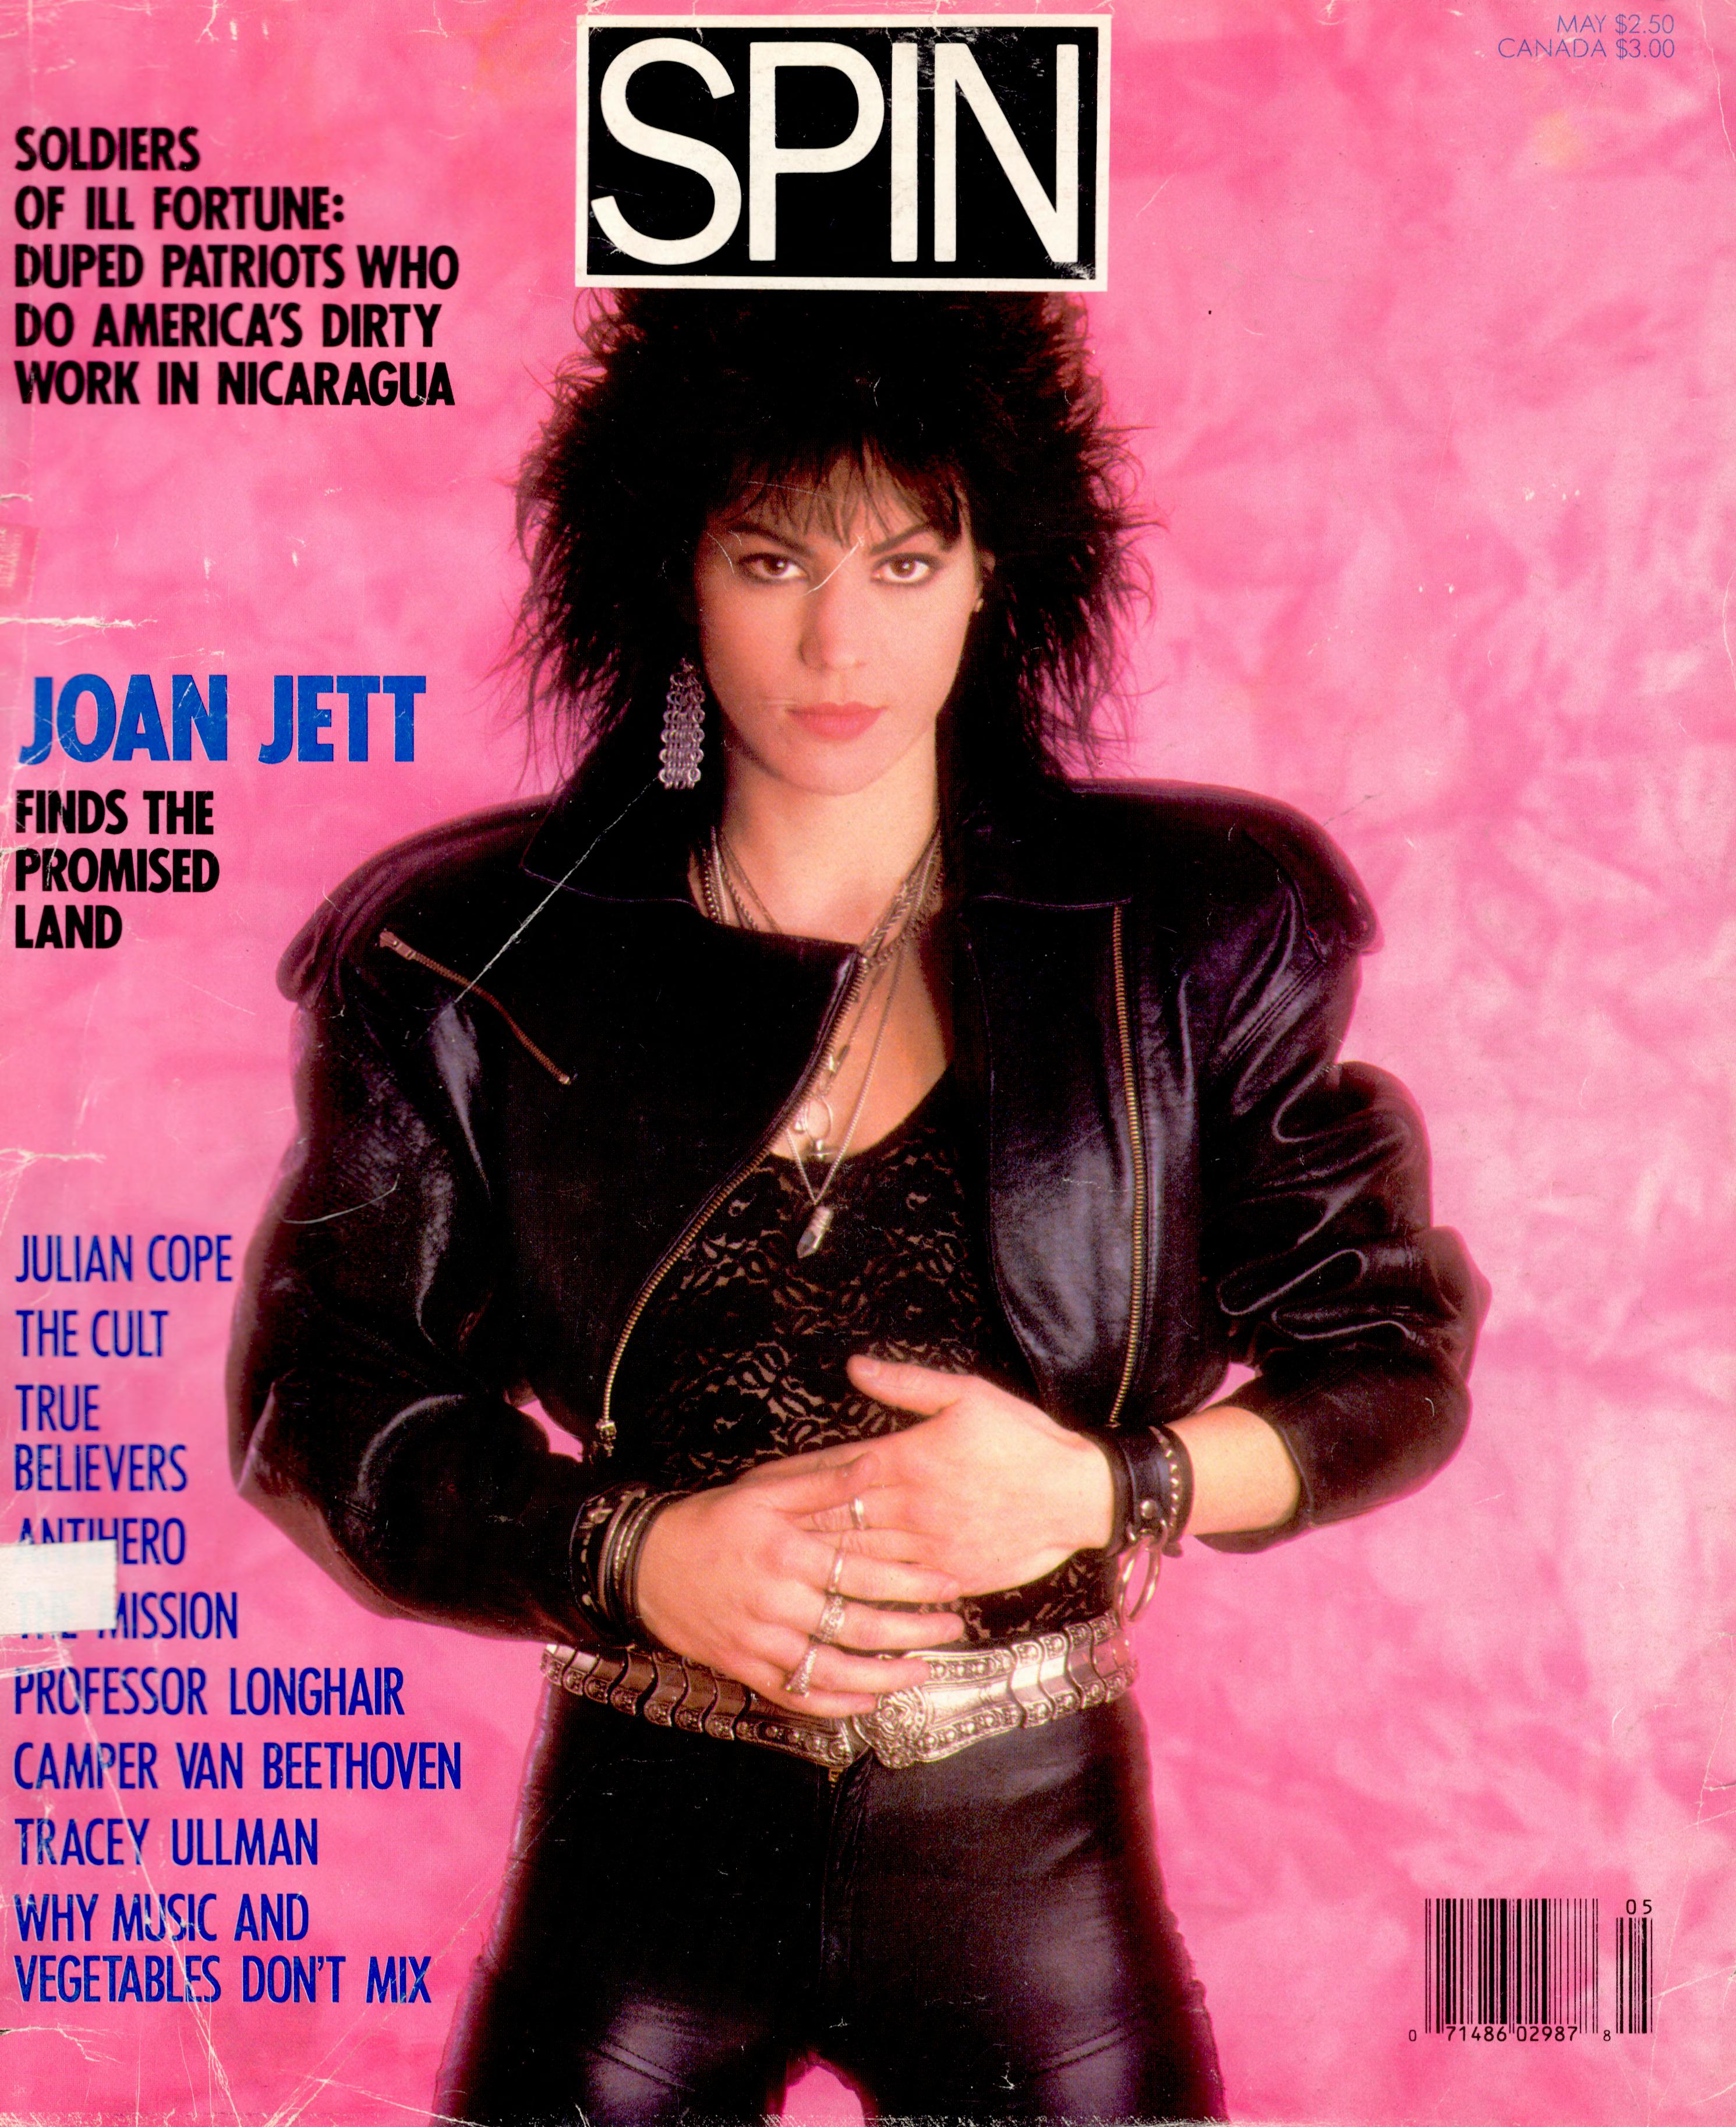 Joan Jett Finds the Promised Land SPIN